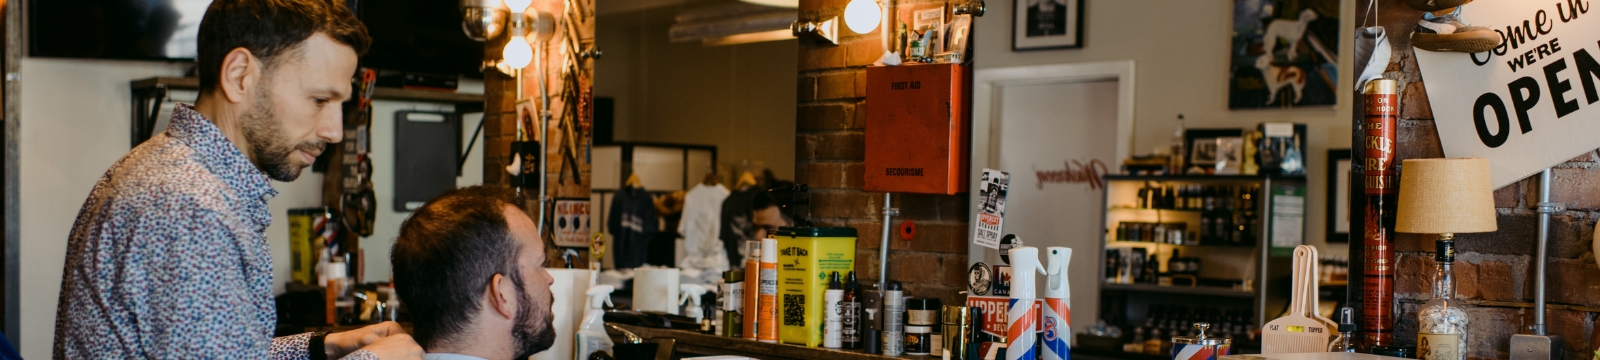 Barber stands behind client in a barbers chair in a barber shop with brick walls and various vintage products surrounding. To the right there is a white sign that reads "come in, we're open."